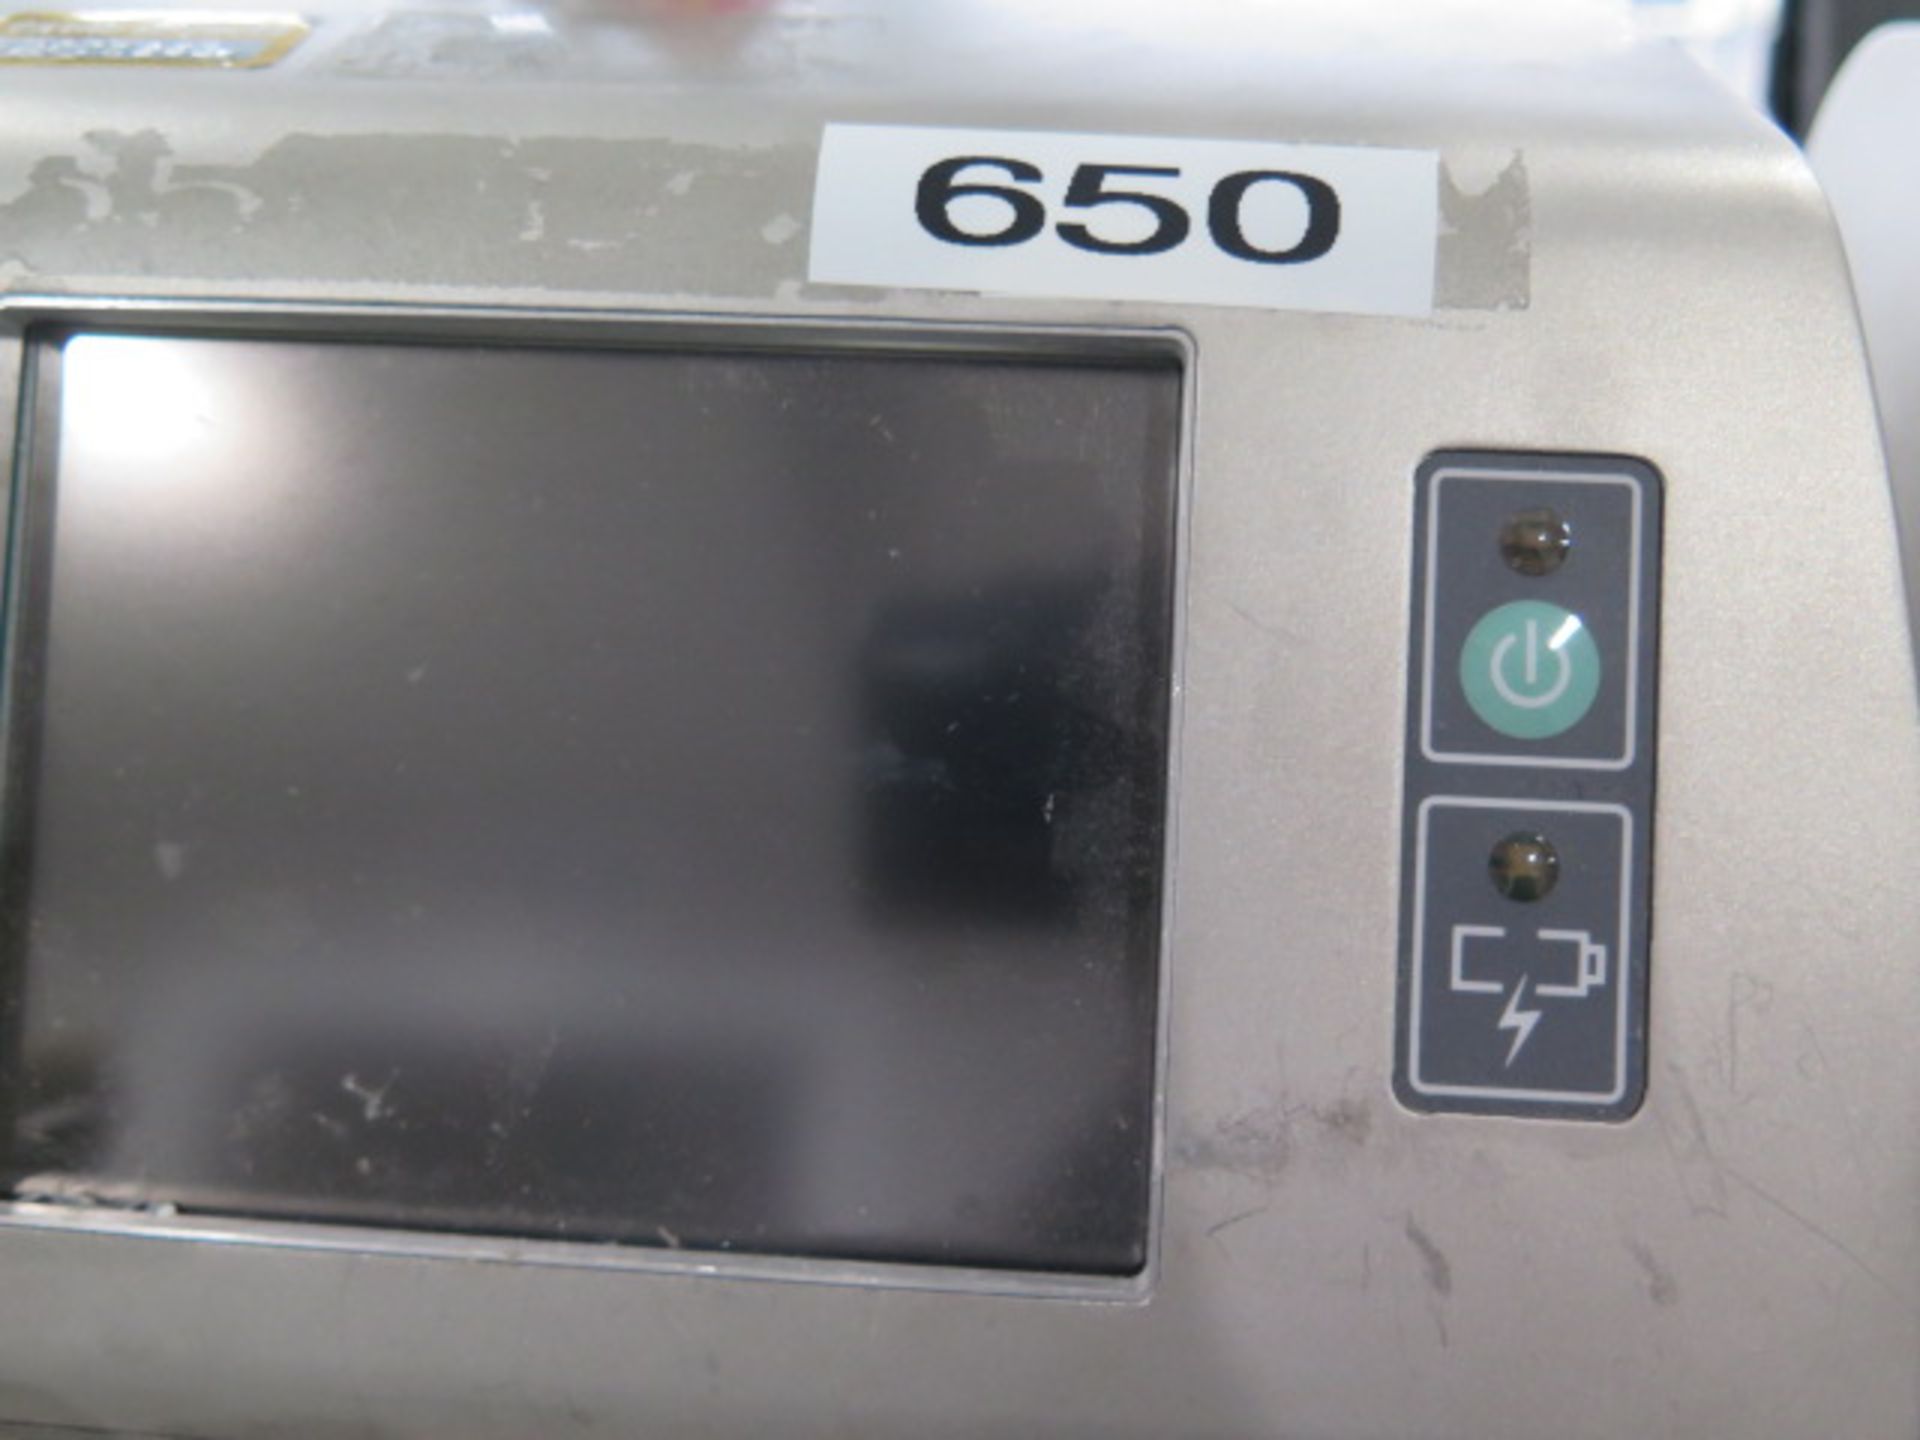 Hach MET ONE 3400 mdl. 3445 Particle Counter w/ Printer (SOLD AS-IS - NO WARRANTY) - Image 7 of 8